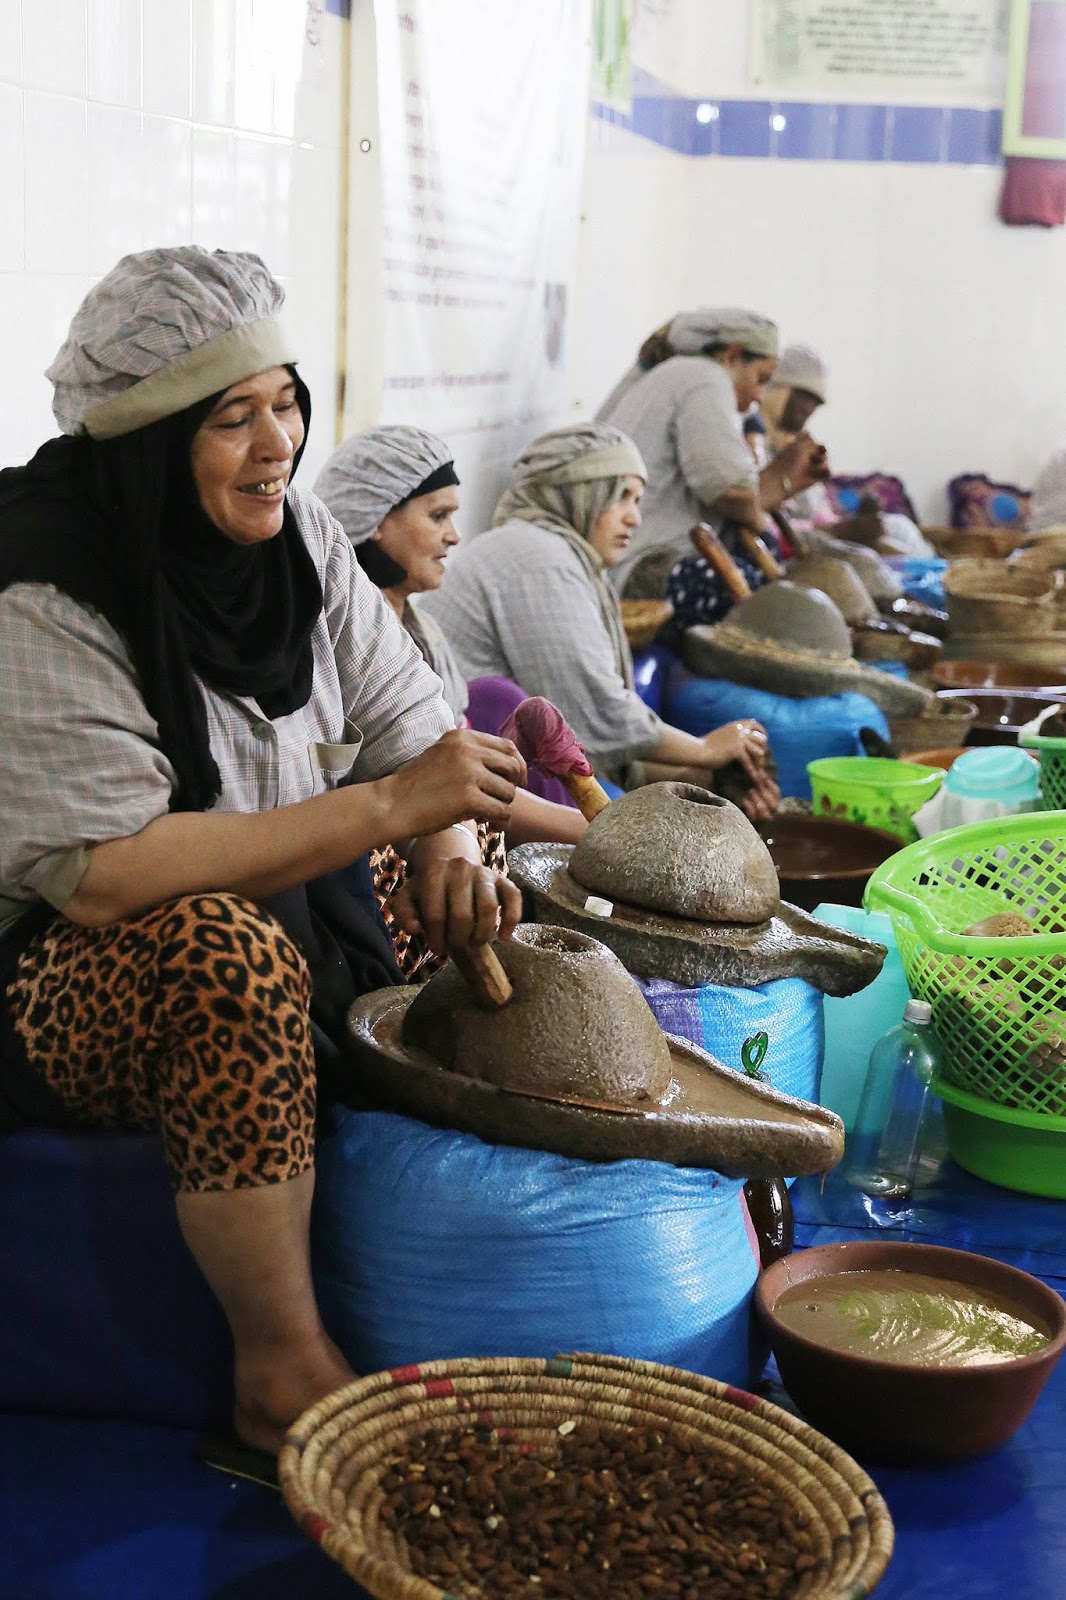 How Argan Oil is Made - From Tree-Climbing Goats to Women's Cooperatives in Morocco